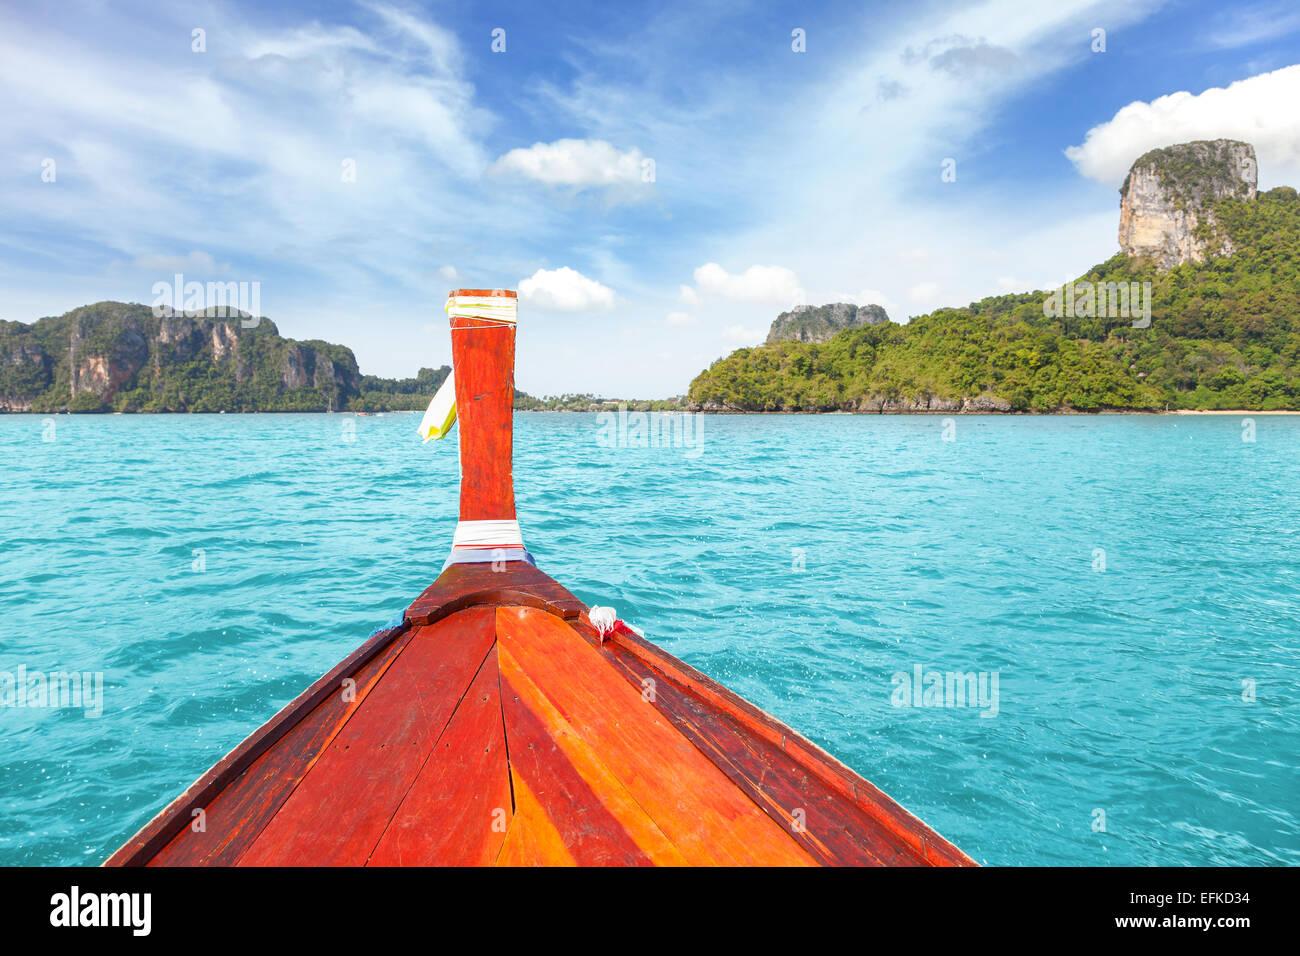 Wooden boat and a tropical island in distance. Stock Photo